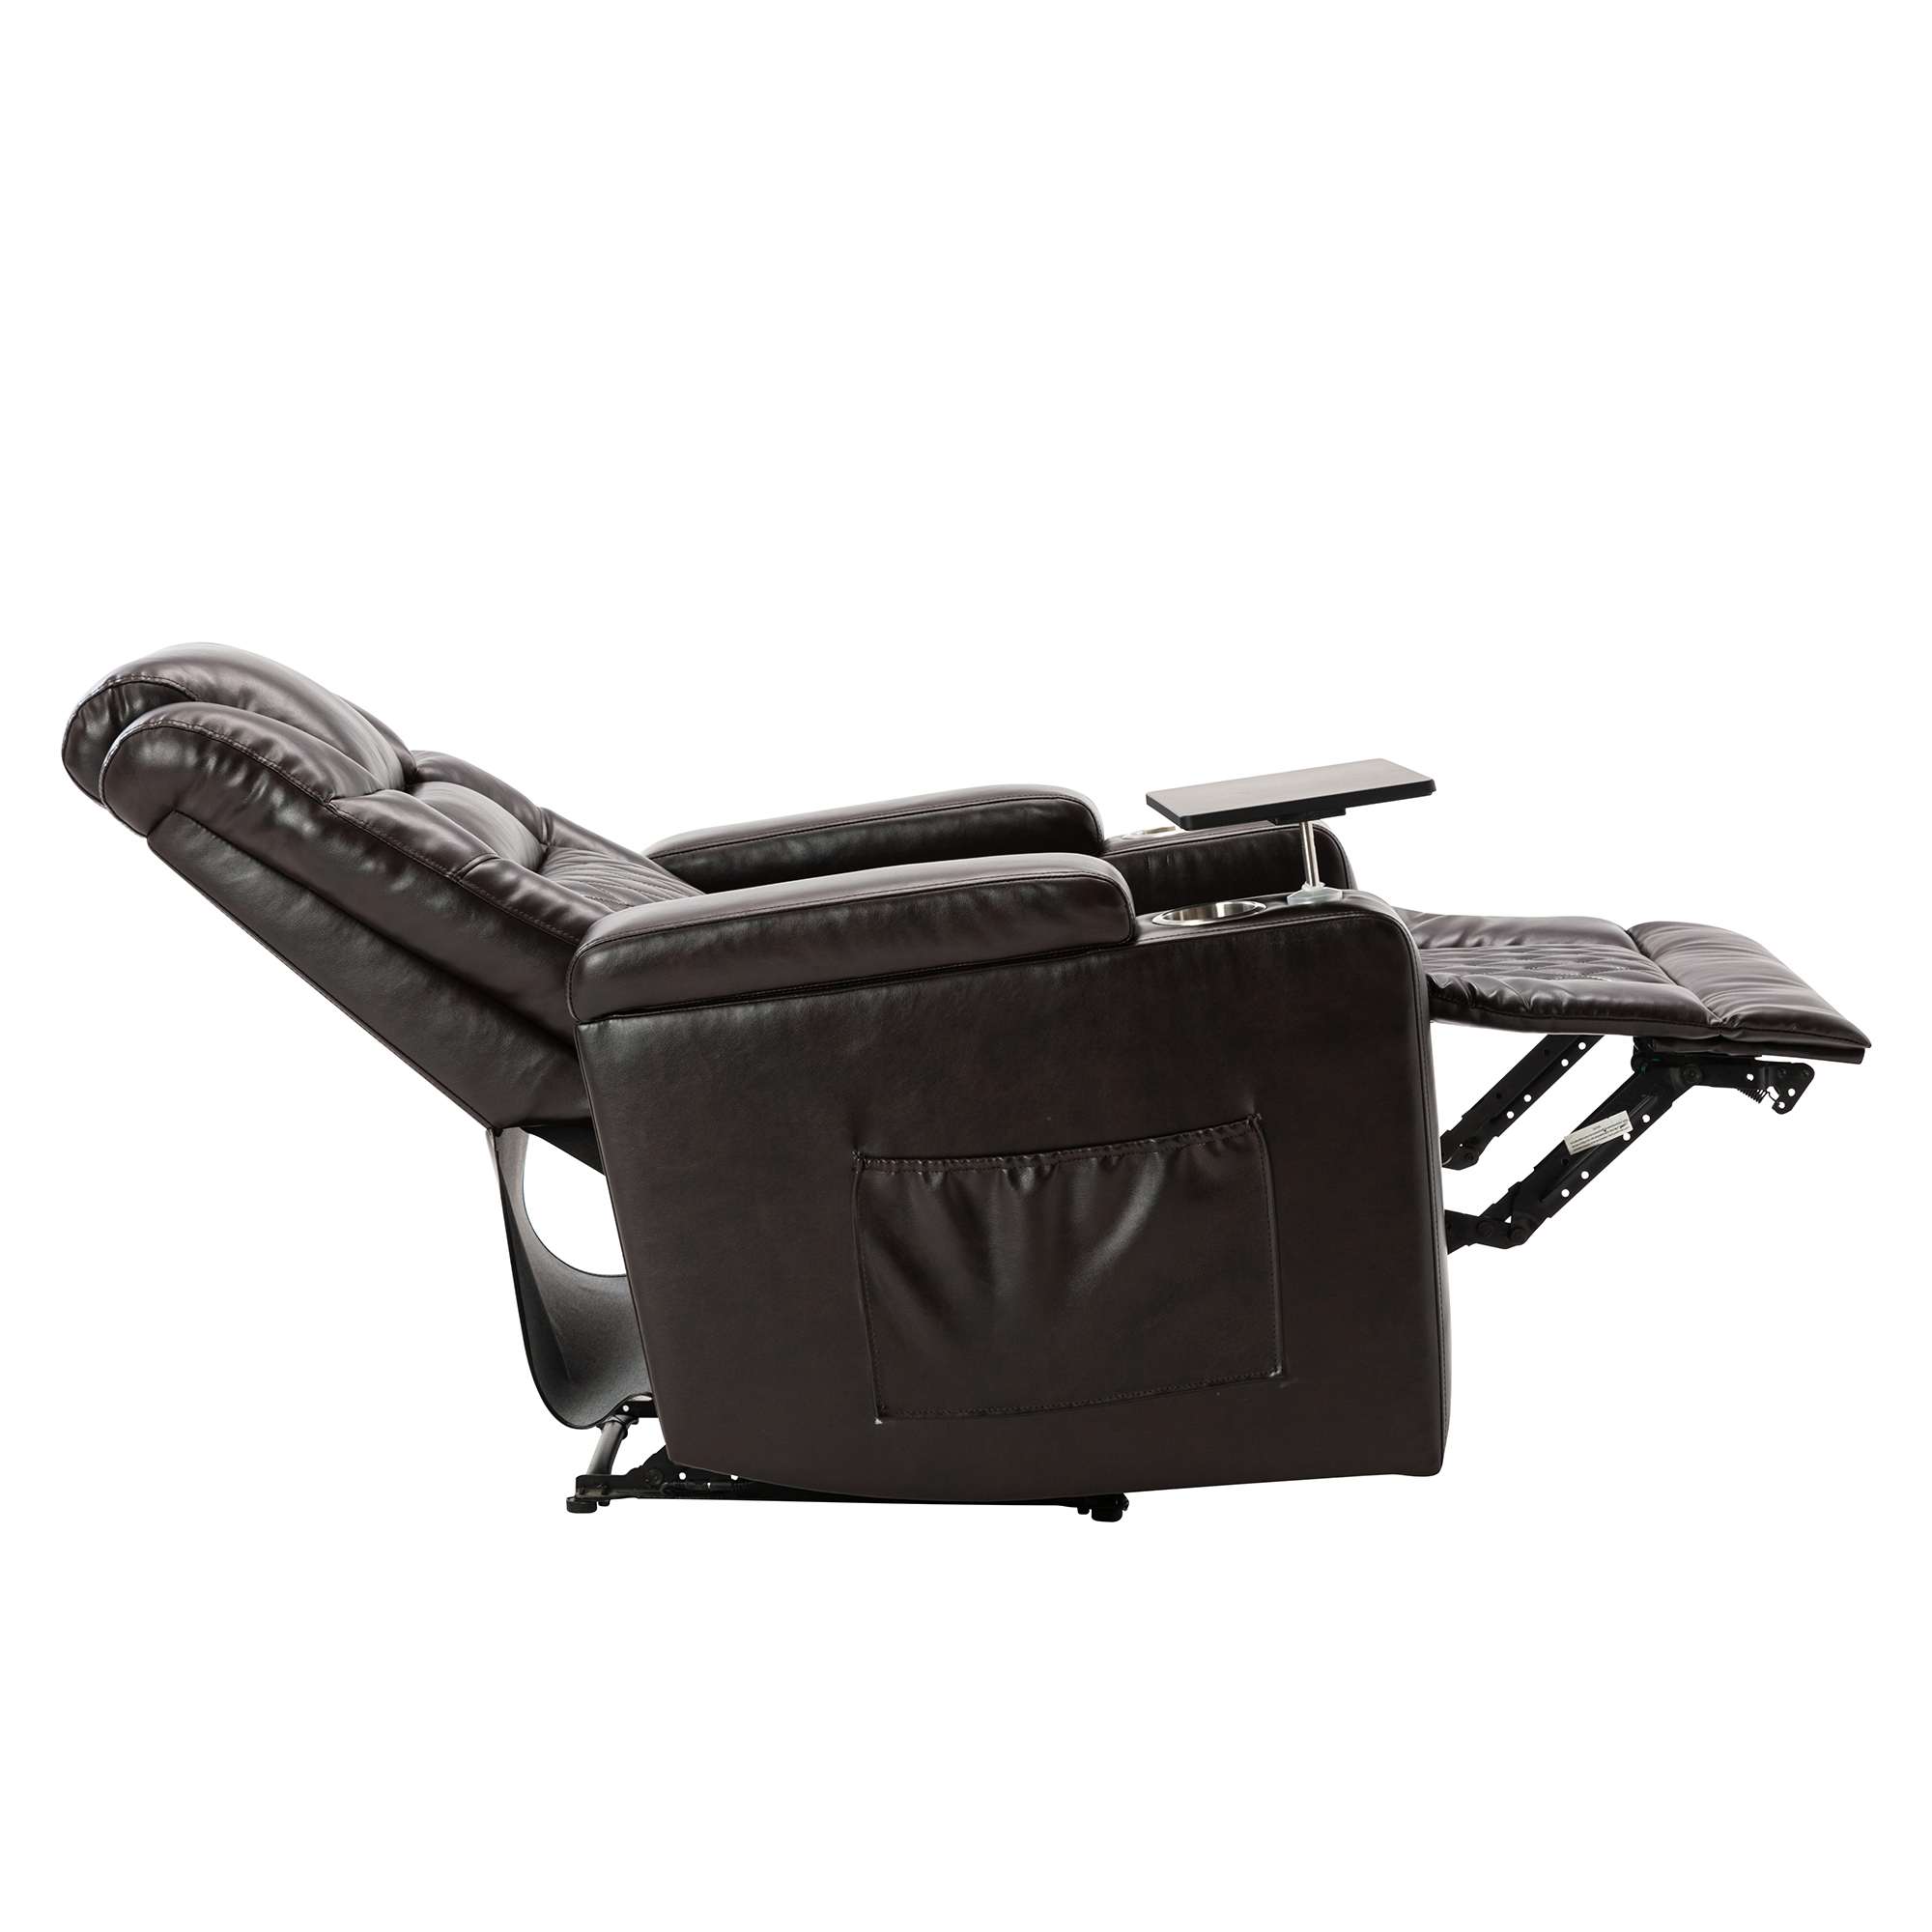 Power Recliner Sofa With USB Charging Port And Hidden Arm Storage, Brown - SG000440AAA